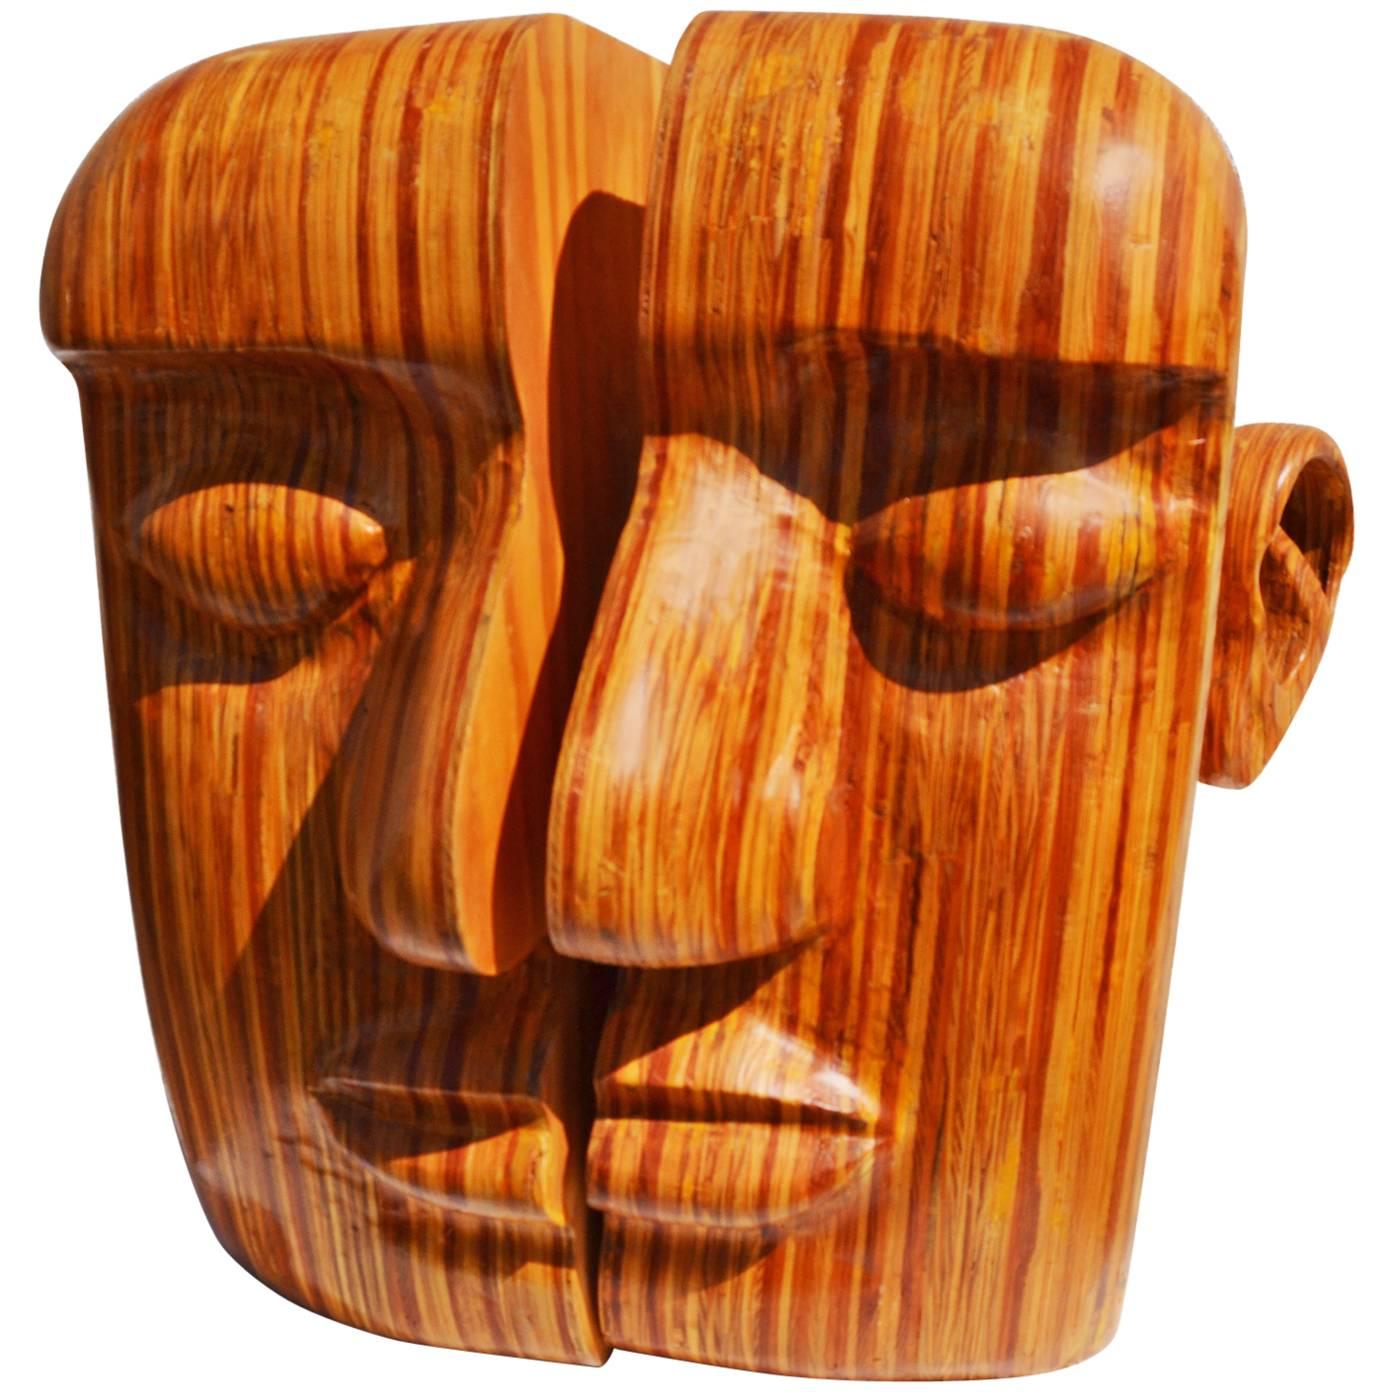 "Split Personality" Laminated Wooden Sculpture by Hy Farber, 2003 For Sale